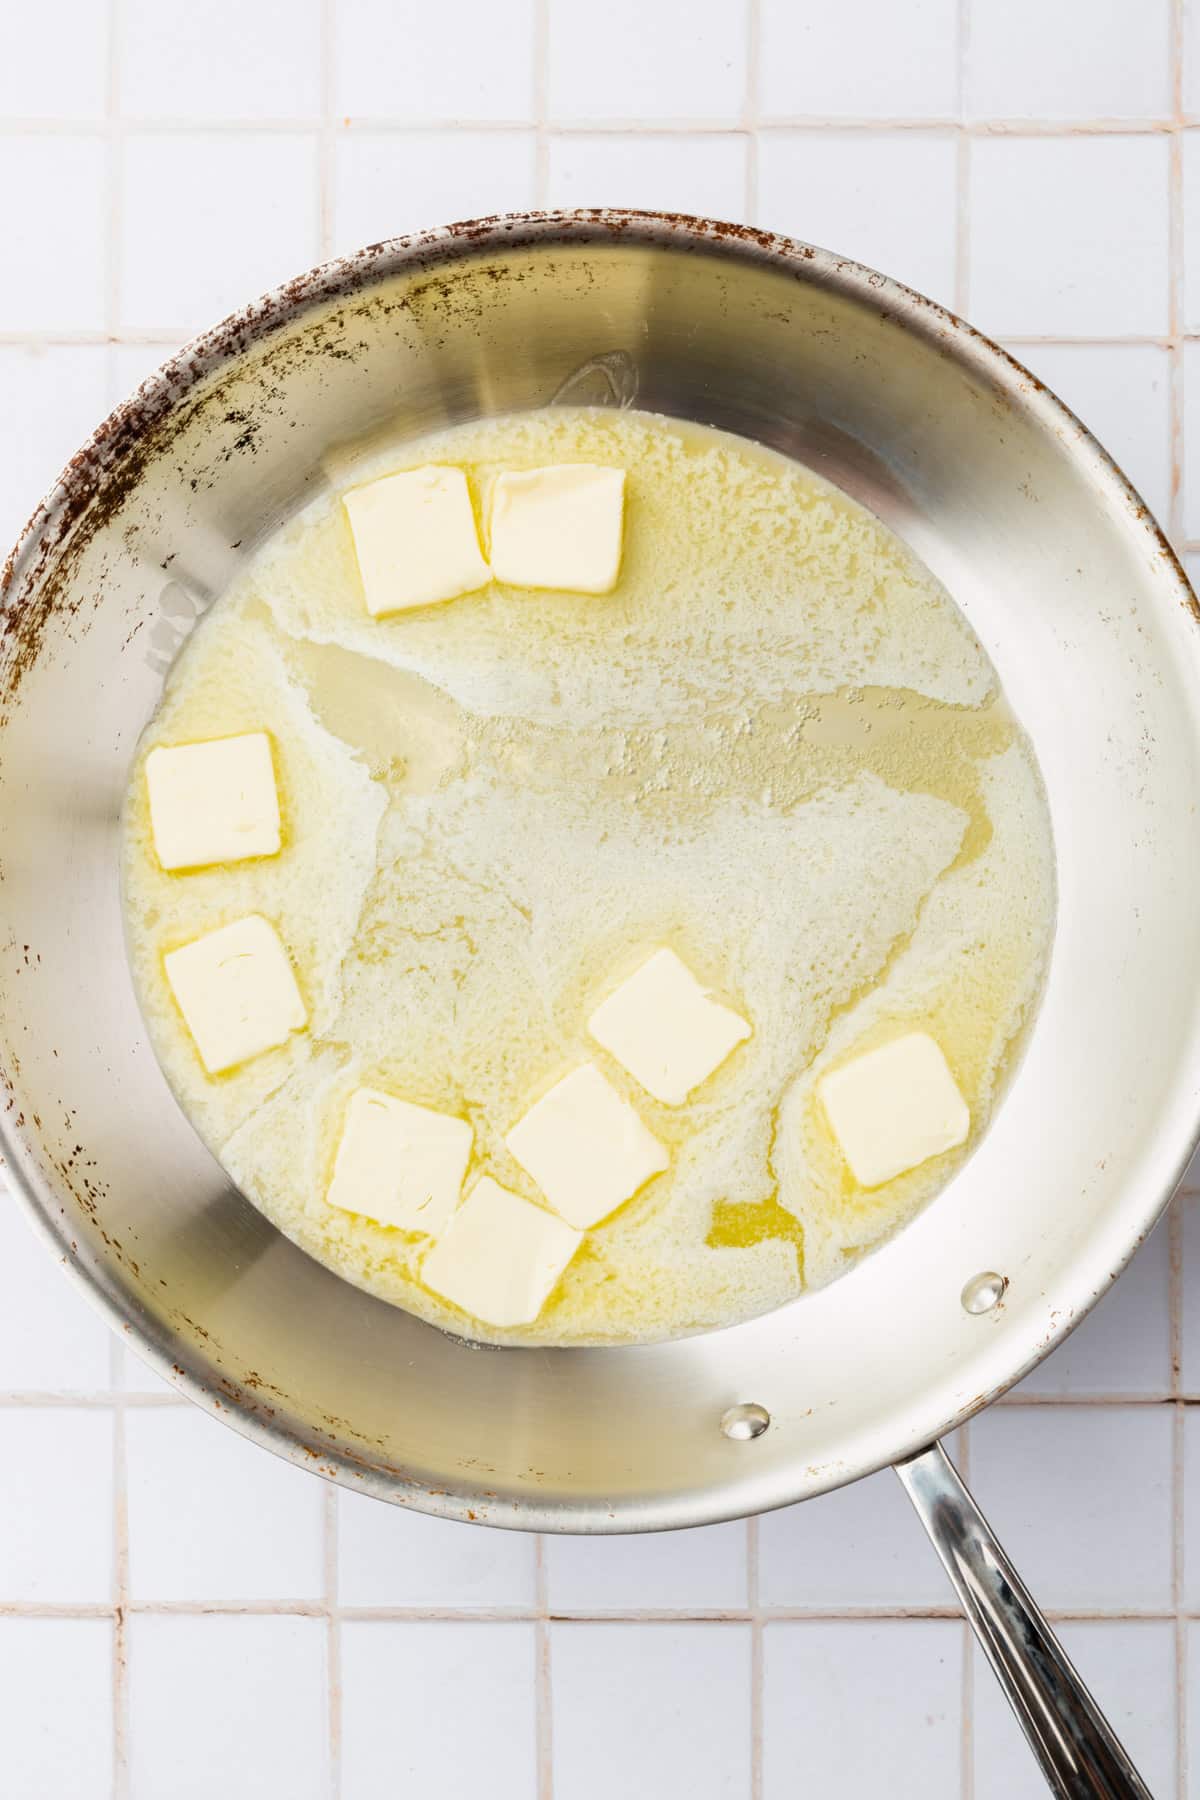 A stainless steel skillet with pats of butter that are beginning to melt.